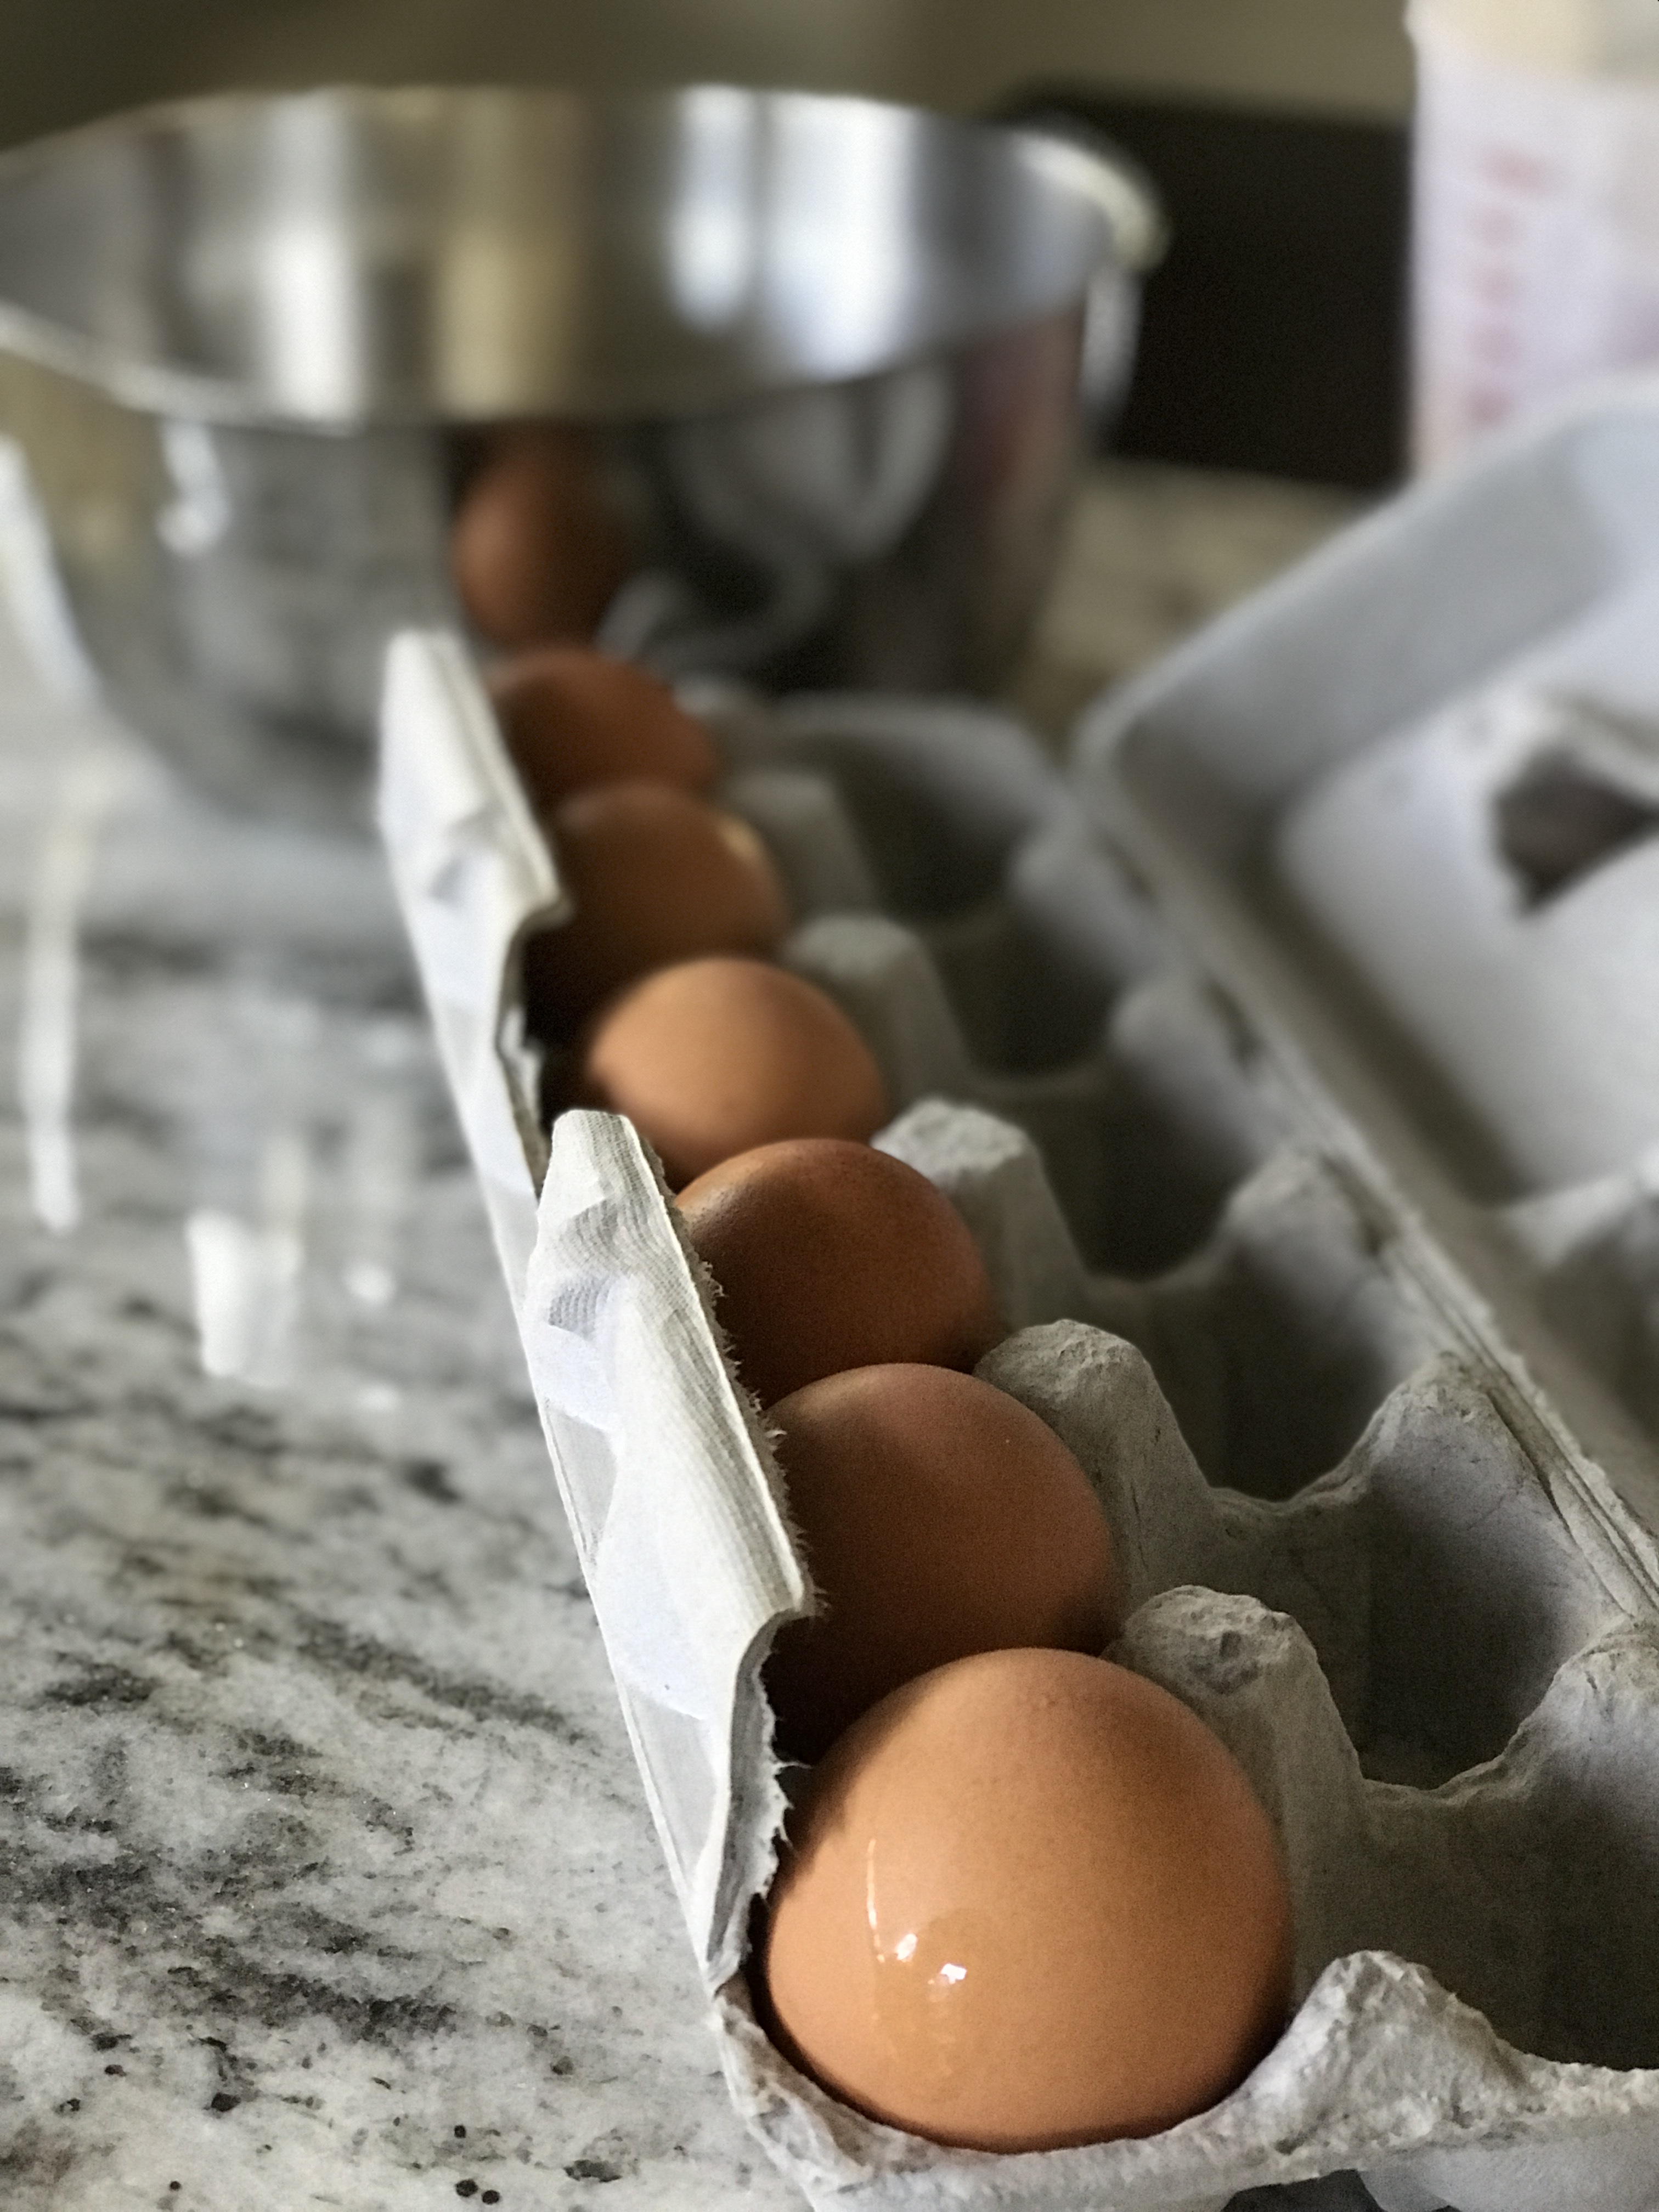 For my best fall recipe I use only the freshest eggs for homemade cooking pasta recipe